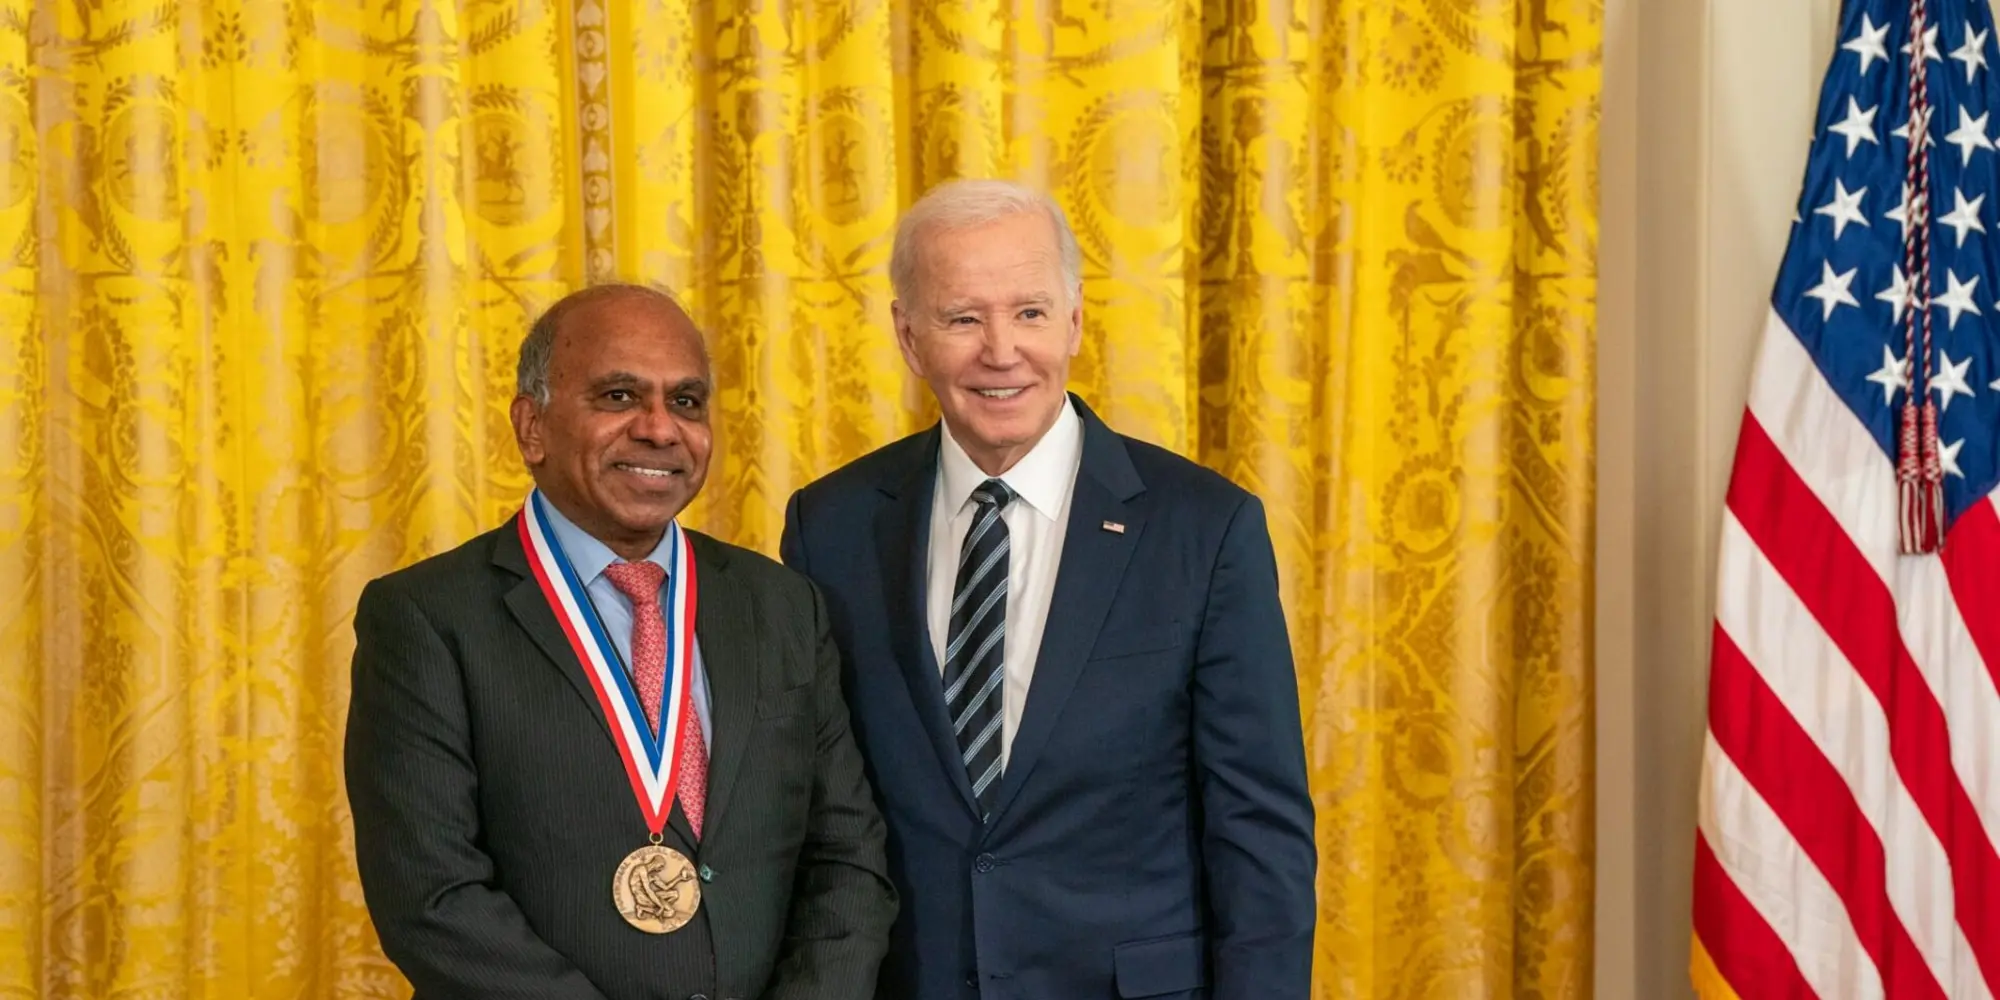 President Biden awards Subra Suresh the National Medal of Science during an awards ceremony in the East Room of The White House, Oct. 24, 2023. Photo by Ryan K. Morris